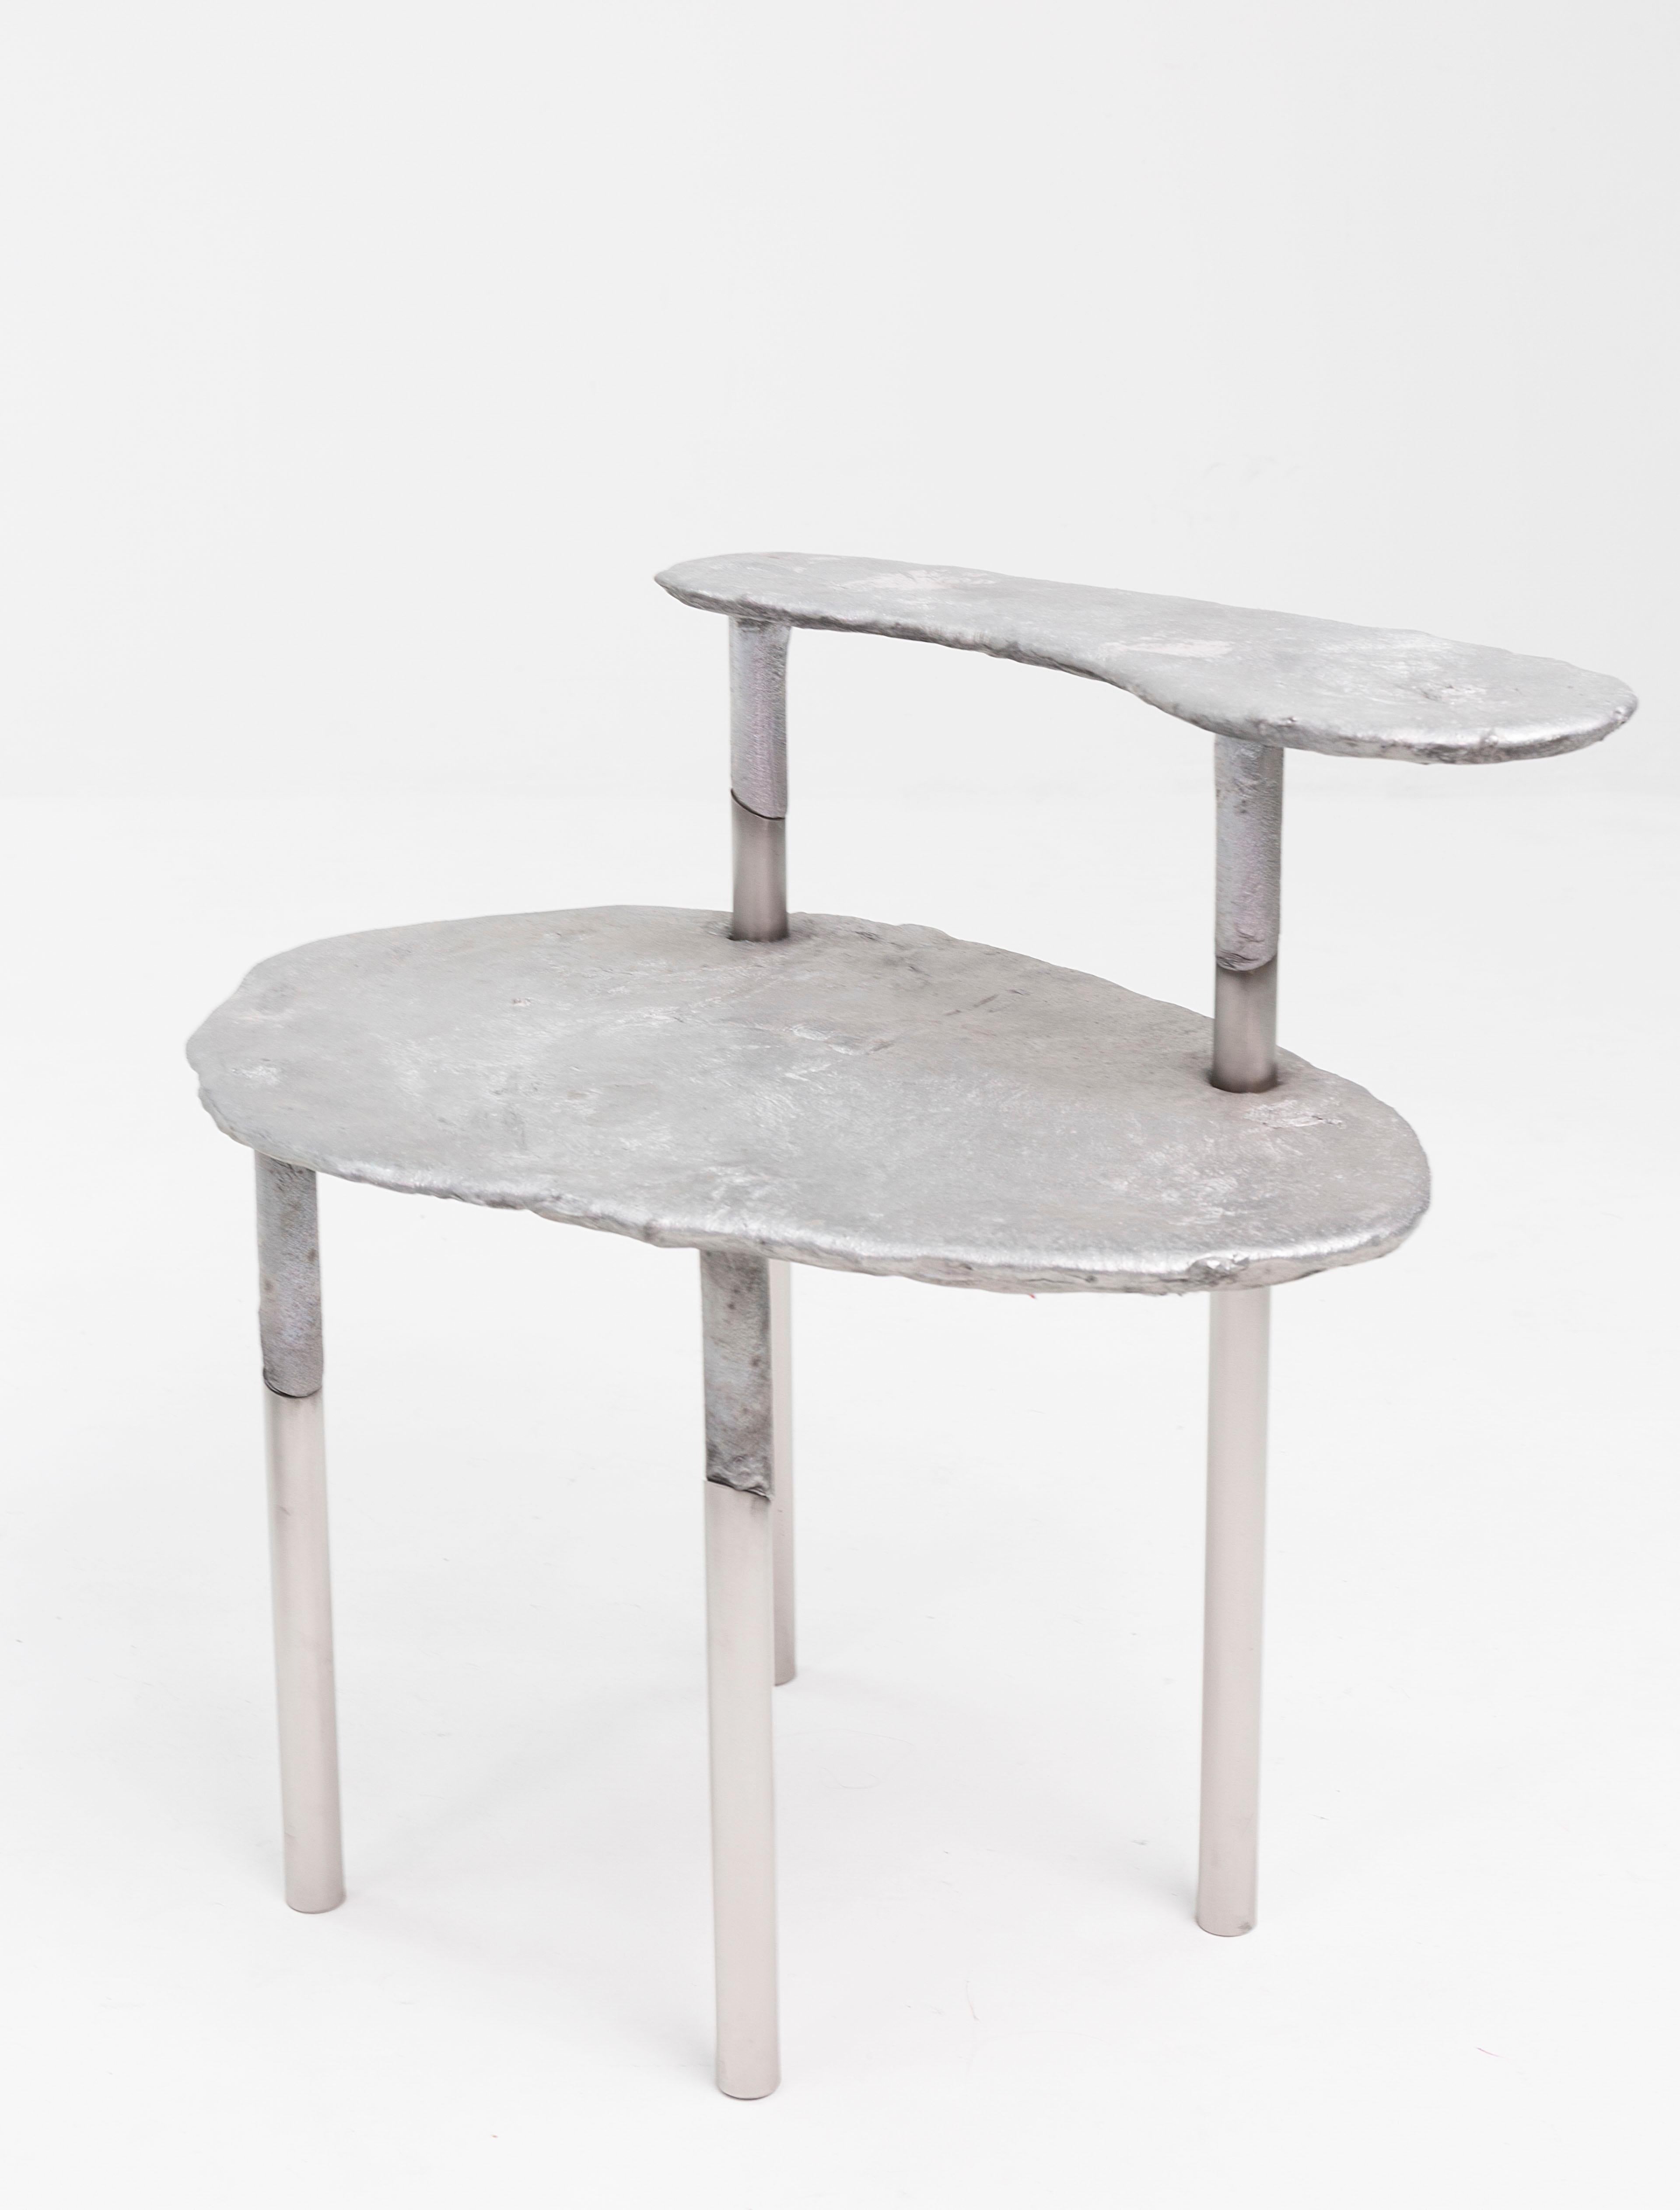 Aluminum concretion stool by Studio Julien Manaira
Dimensions: 68 x 47 x 65 cm
Materials: Aluminum, stainless steel

The concretion project consists of sand-casting aluminum in a base of stainless steel tubes to form objects. The tubes are